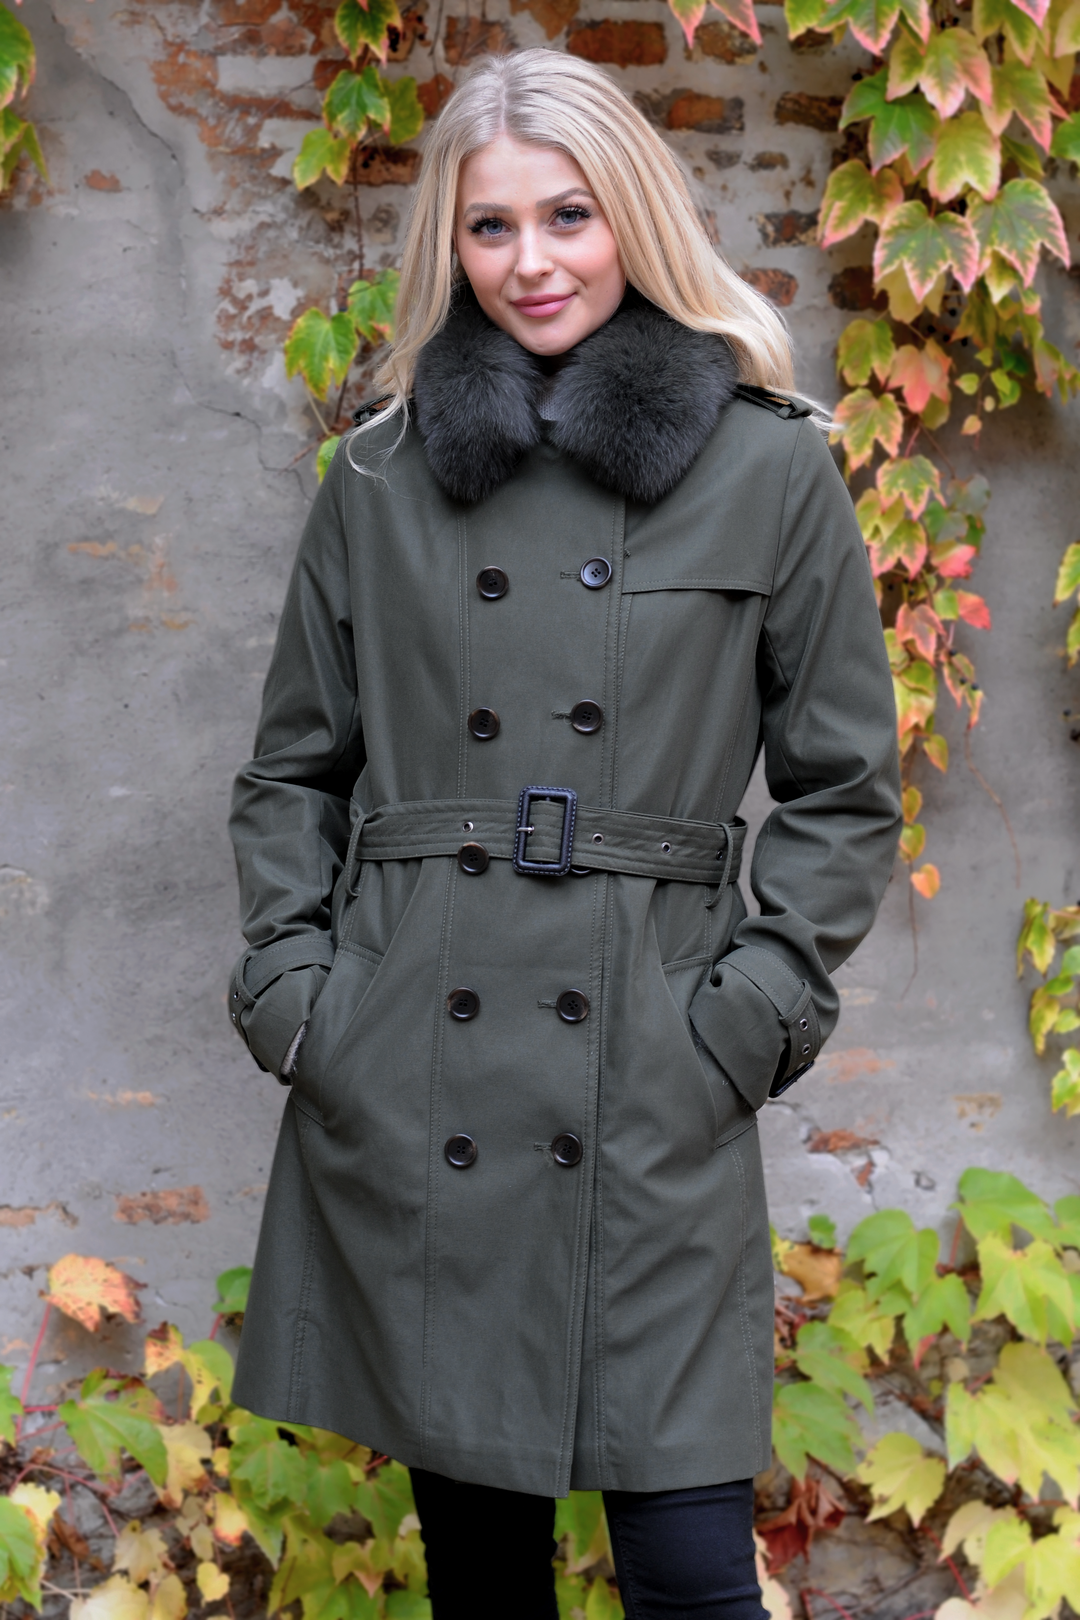 Daisy Army Trench Coat wit fur collar - women